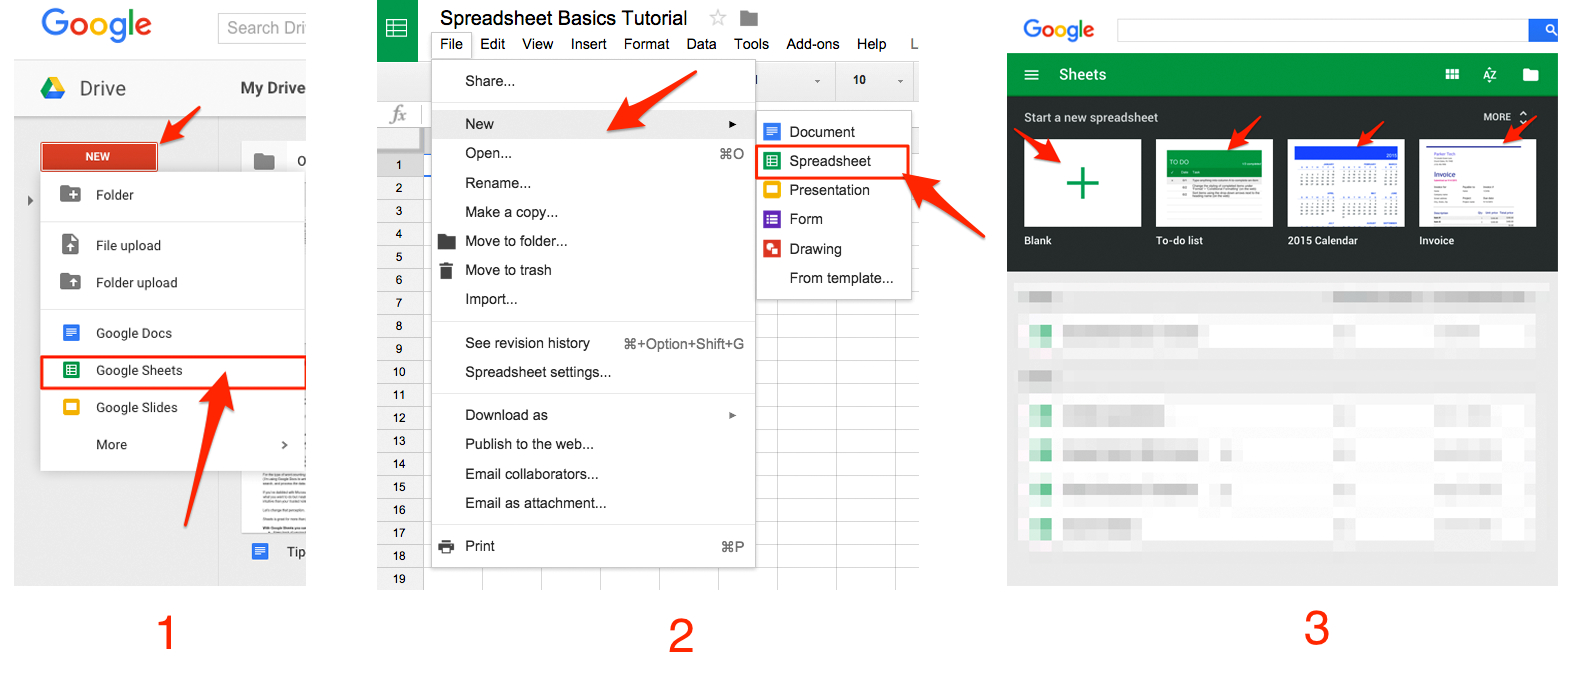 How Do I Make A Spreadsheet In Google Sheets 101: The Beginner's Guide To Online Spreadsheets  The